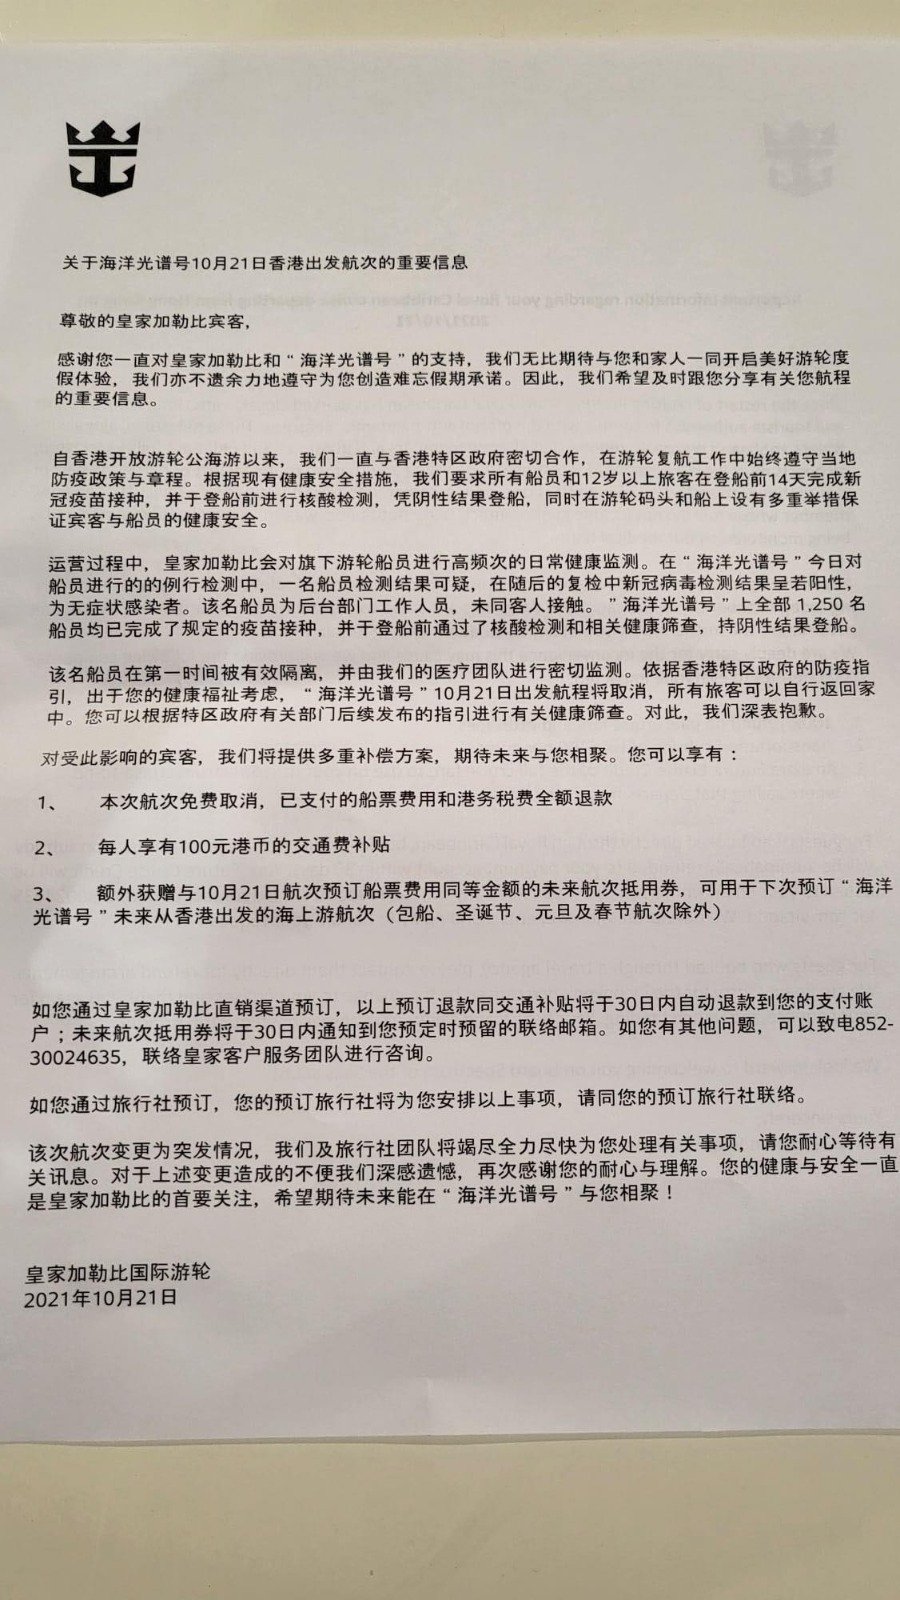 A copy of the letter sent out to guests. (Mandarin Version)